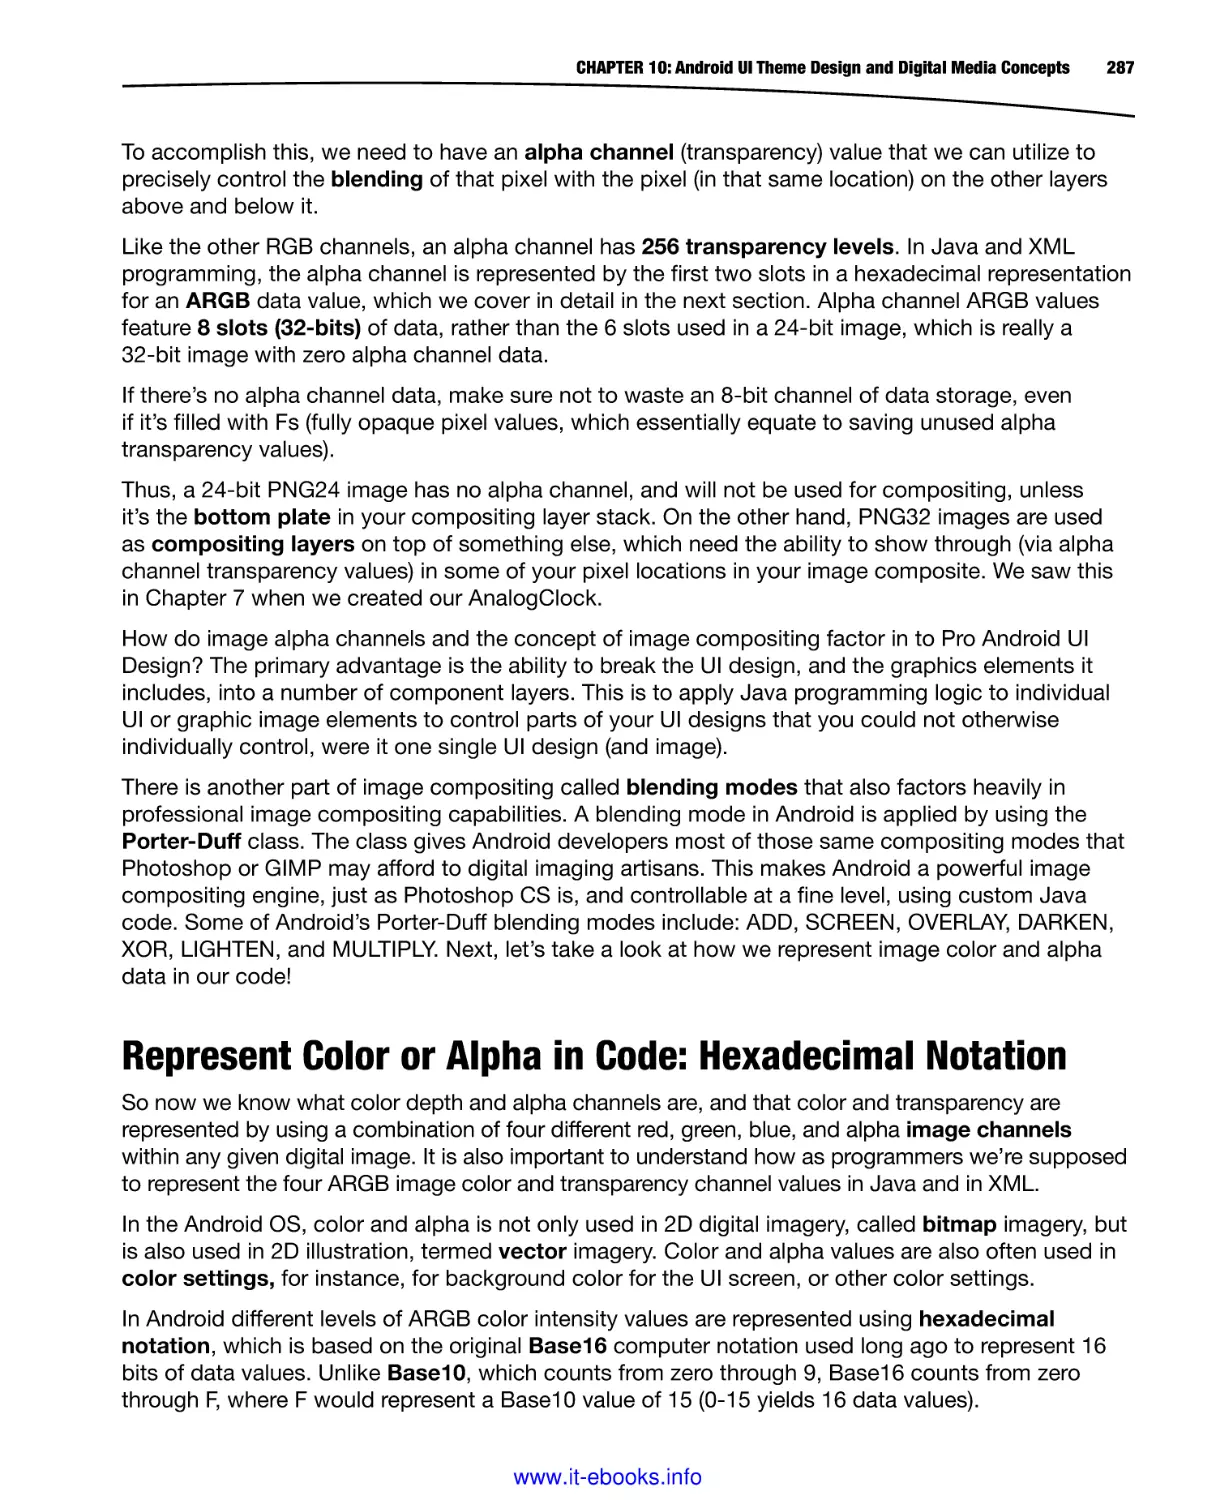 Represent Color or Alpha in Code